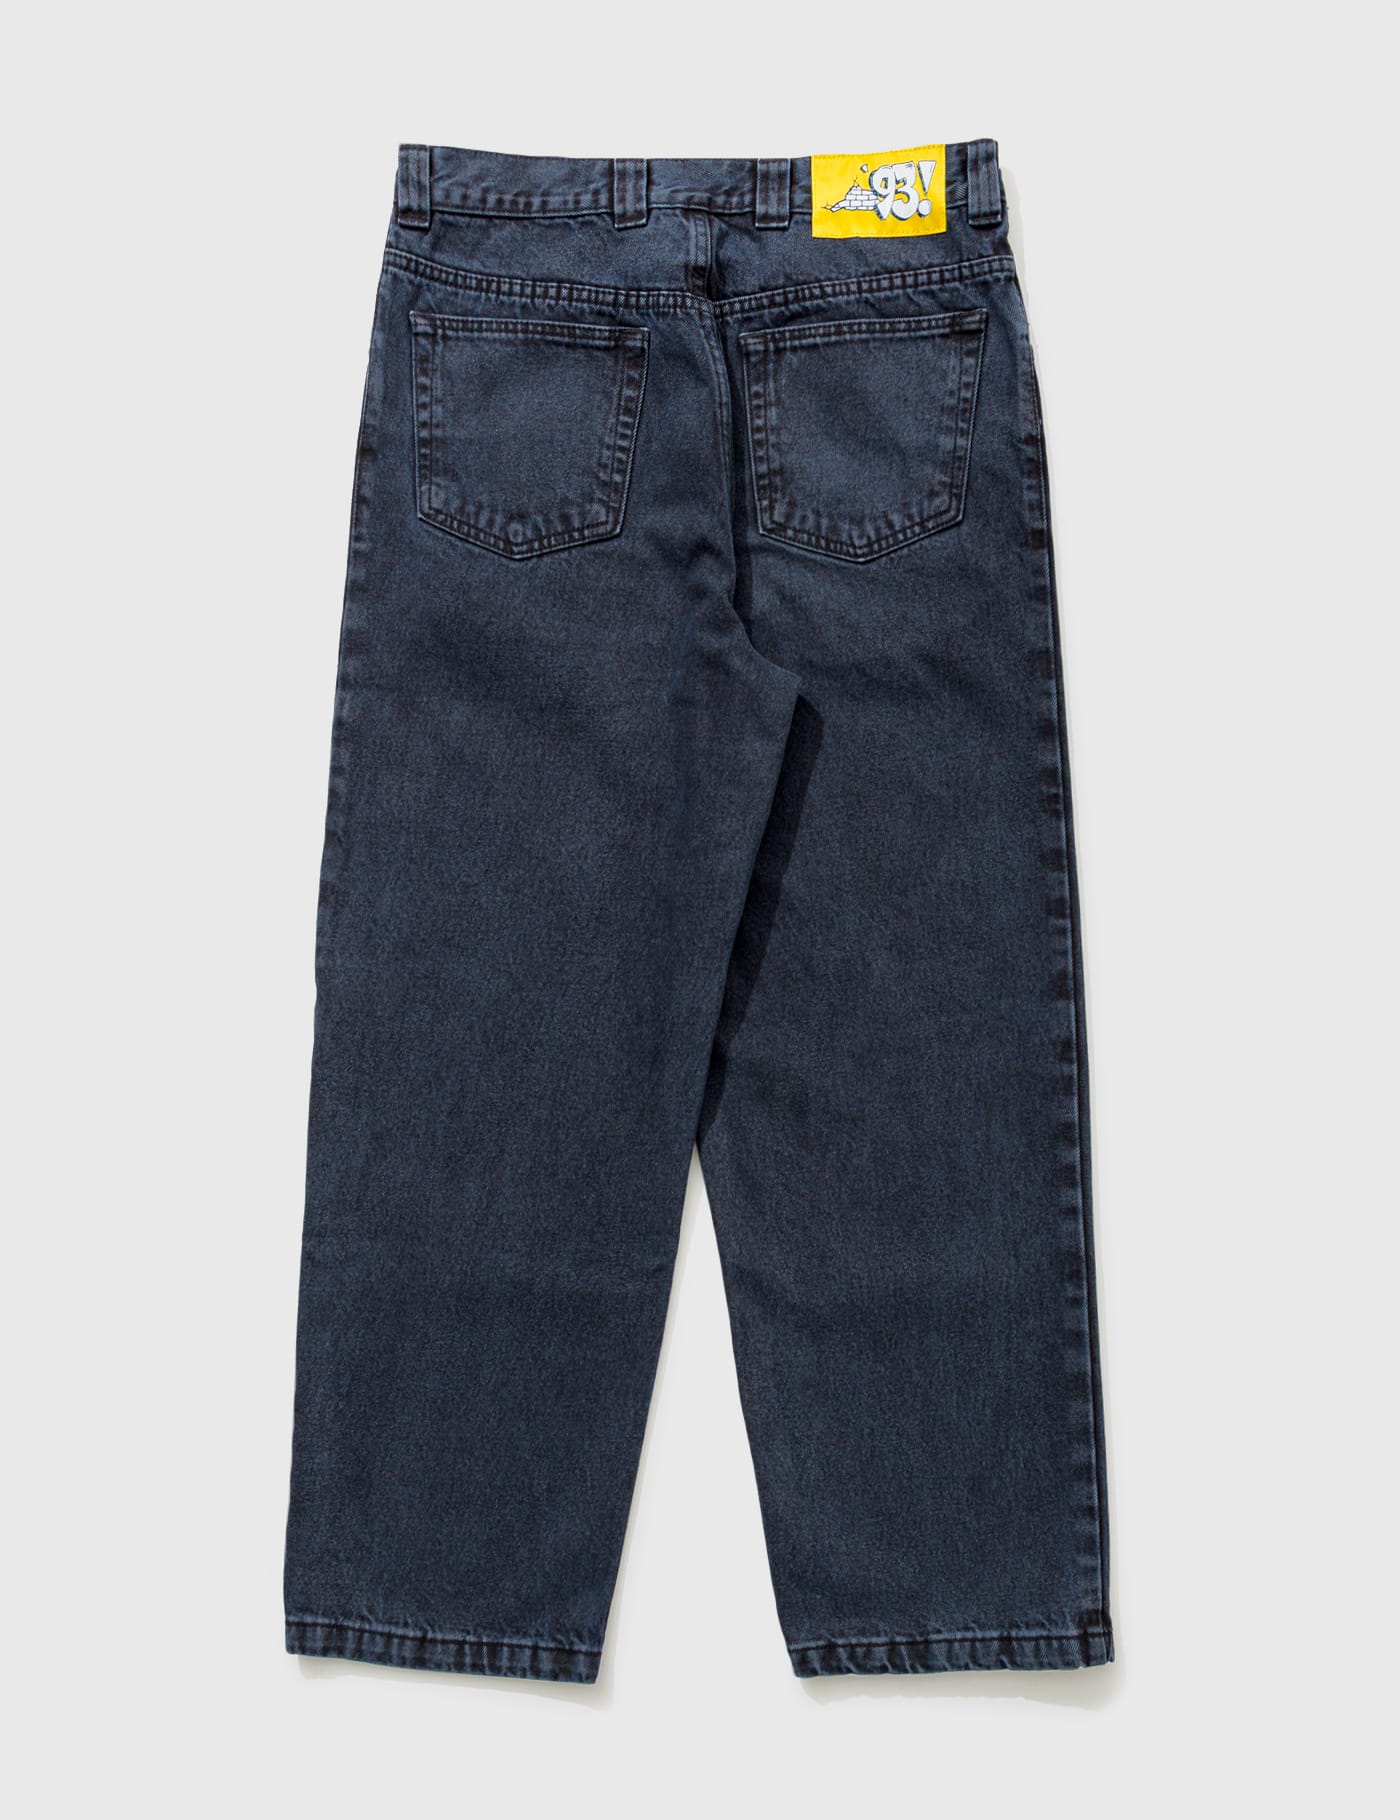 Polar Skate Co. - 93! Denim Jeans | HBX - Globally Curated Fashion and  Lifestyle by Hypebeast